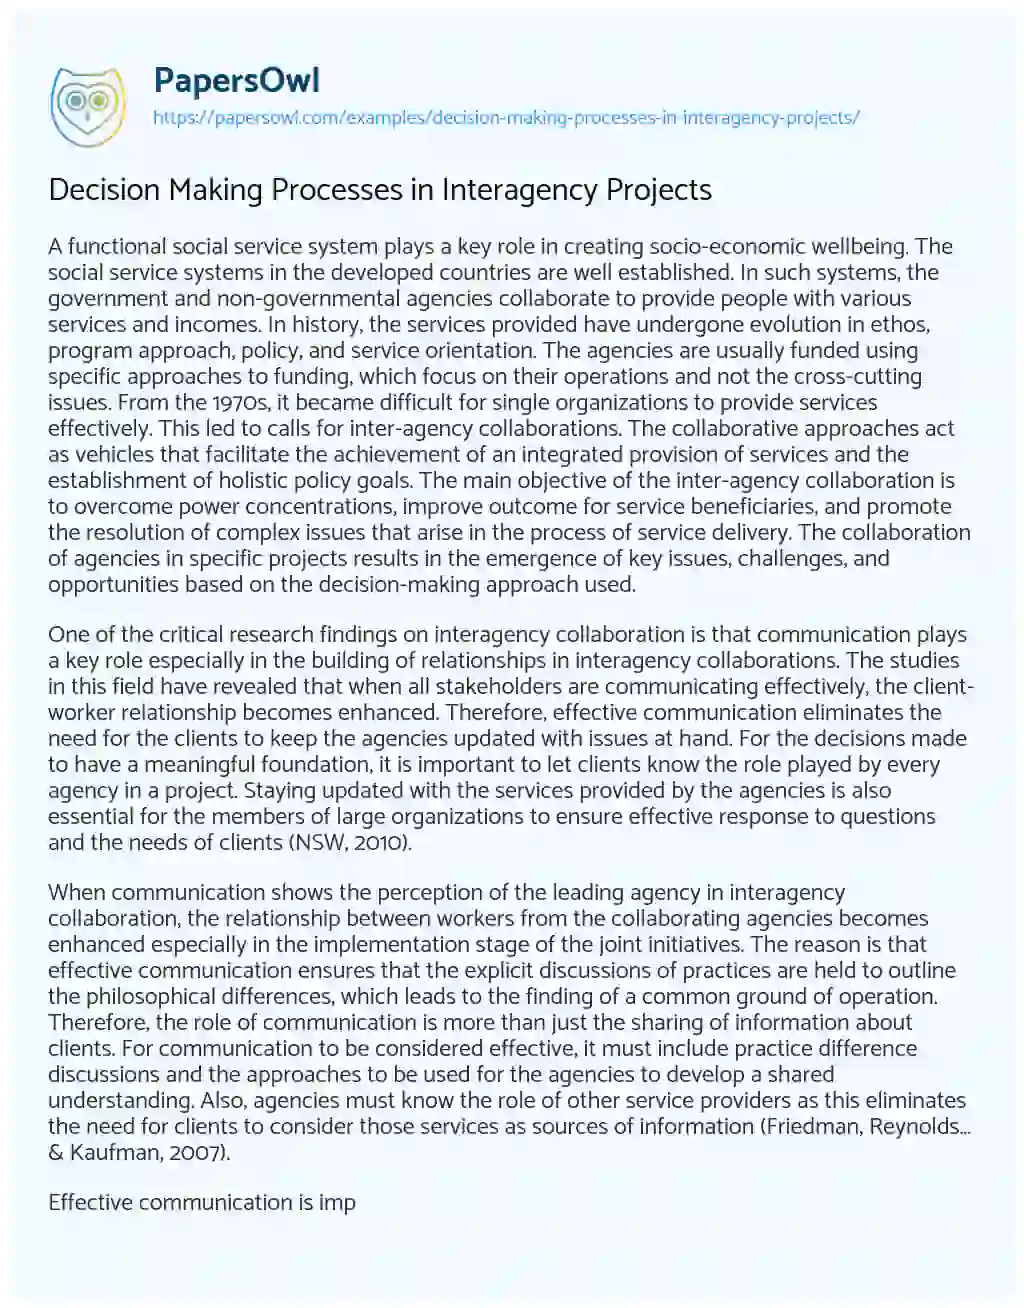 Essay on Decision Making Processes in Interagency Projects